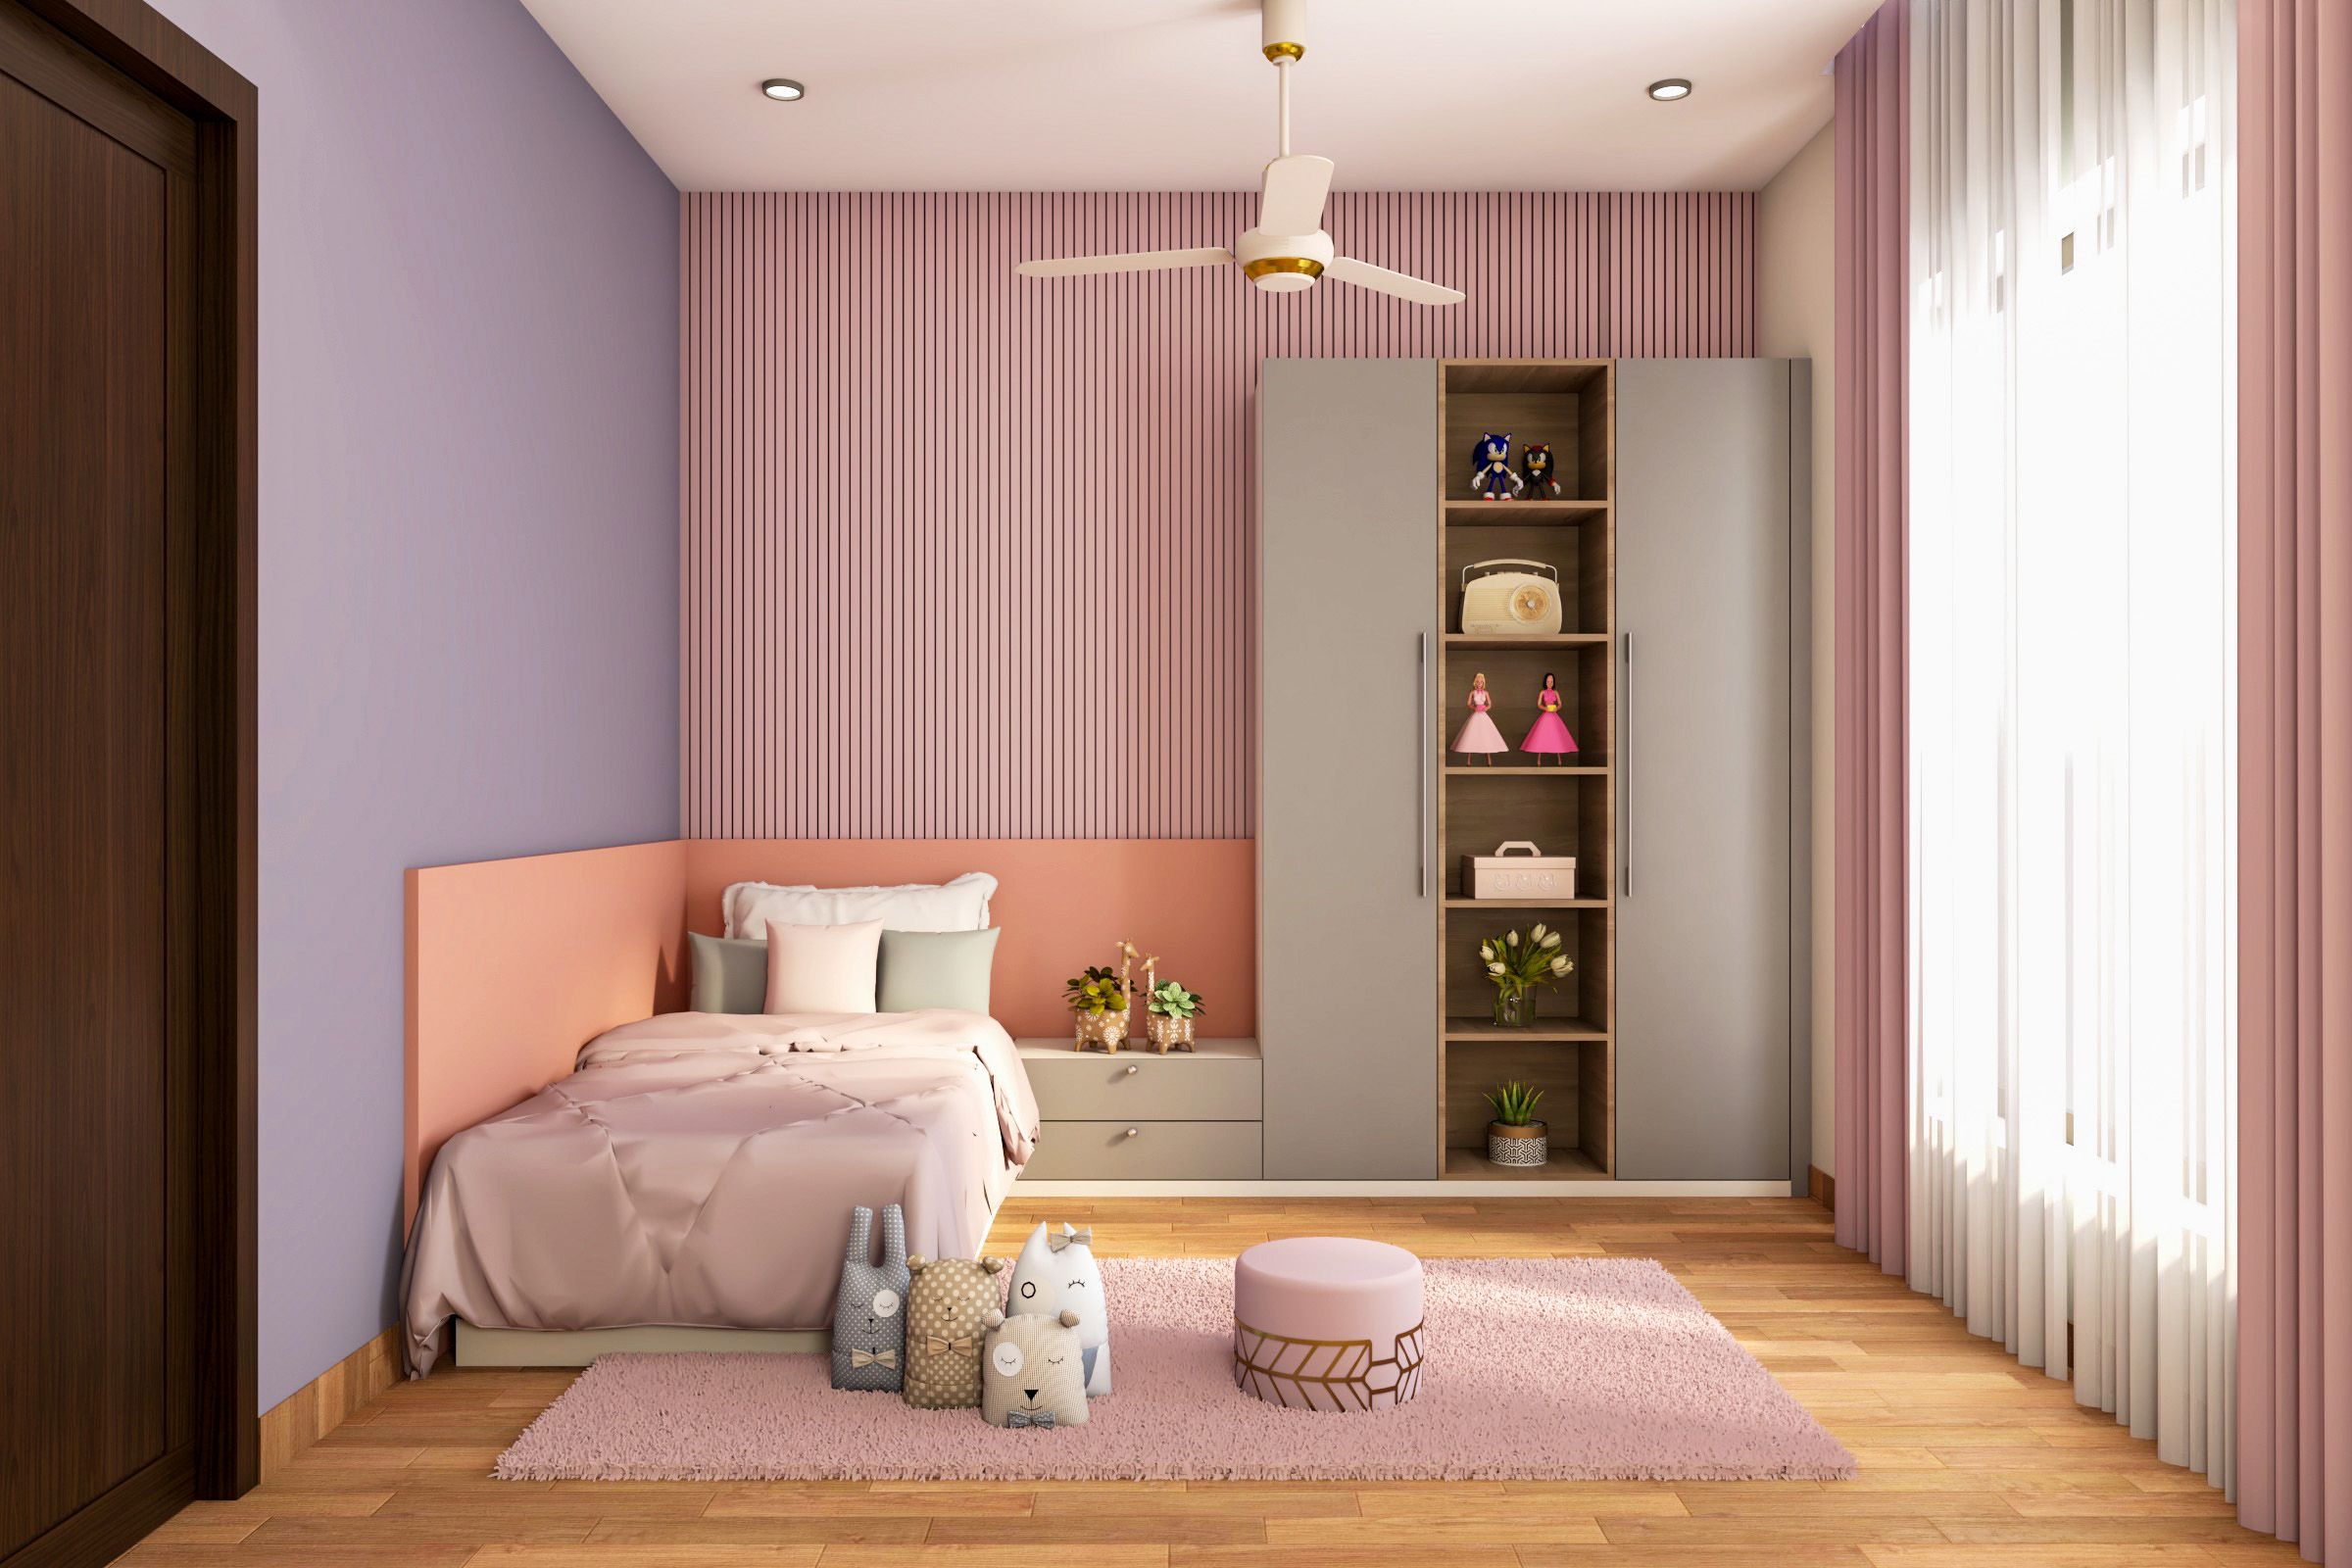 Modern Kids Room With A Single Space-Saving Bed Integrated With 2-Door Grey Swing Wardrobe